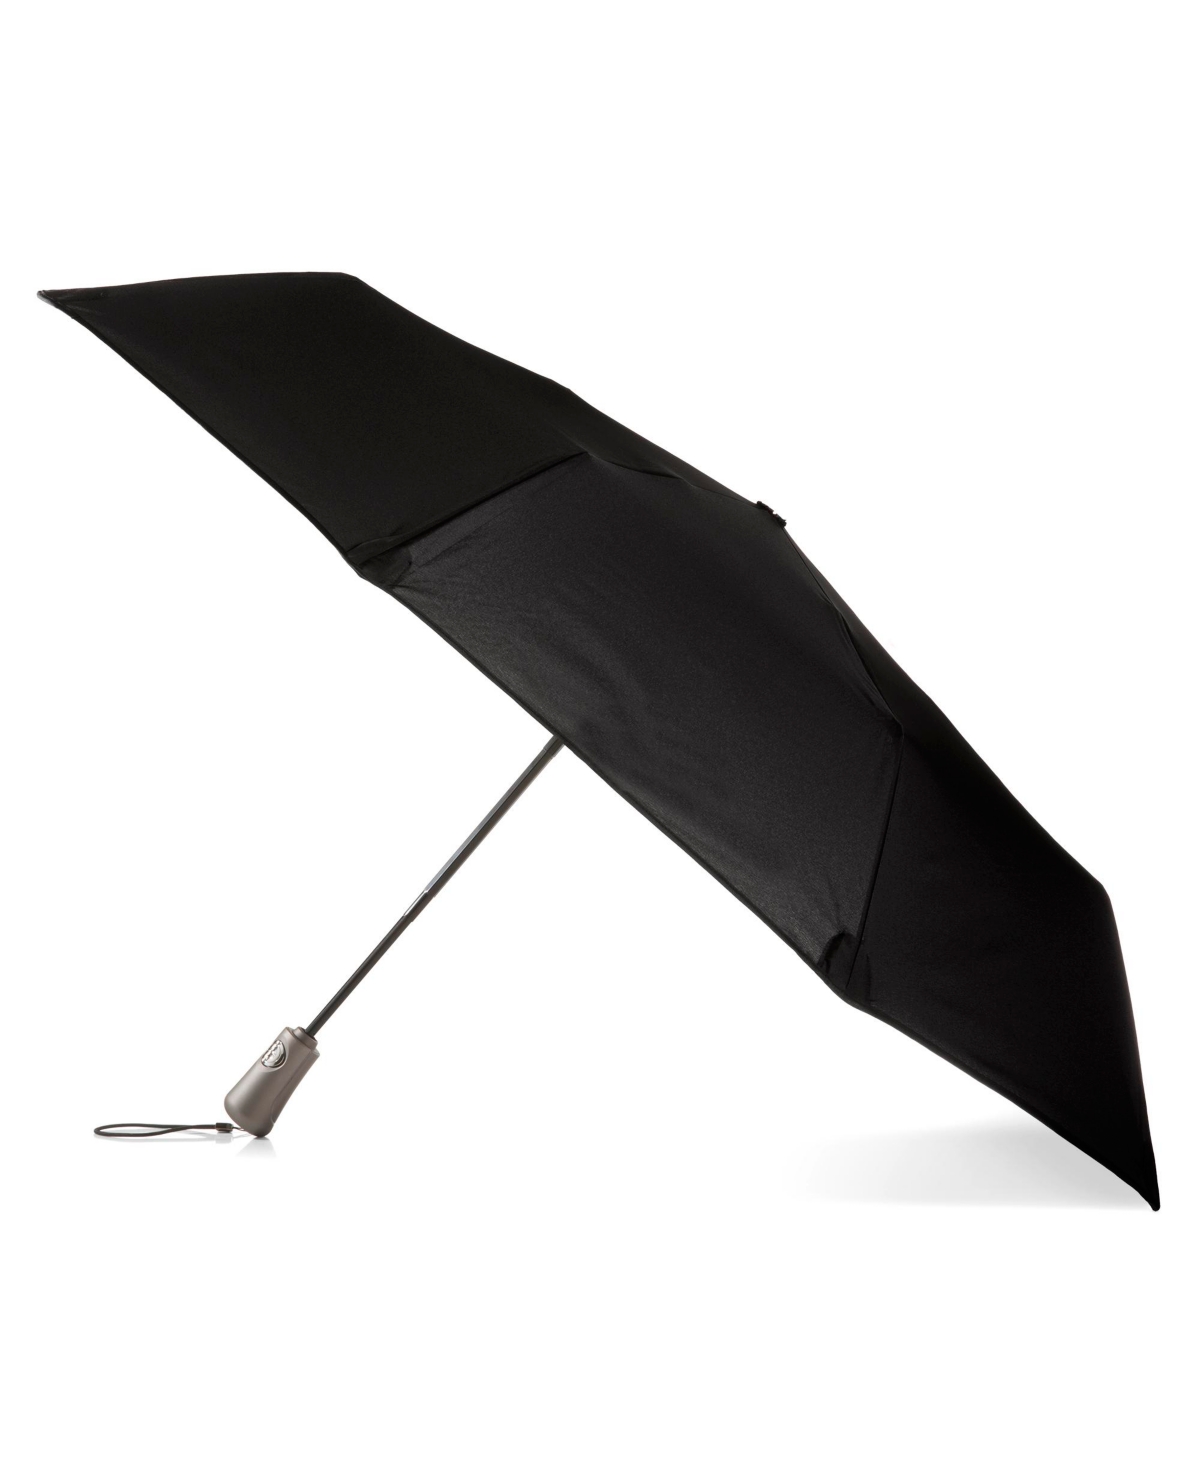 Total Protection Auto Open and Close 3-Section Umbrella - Black